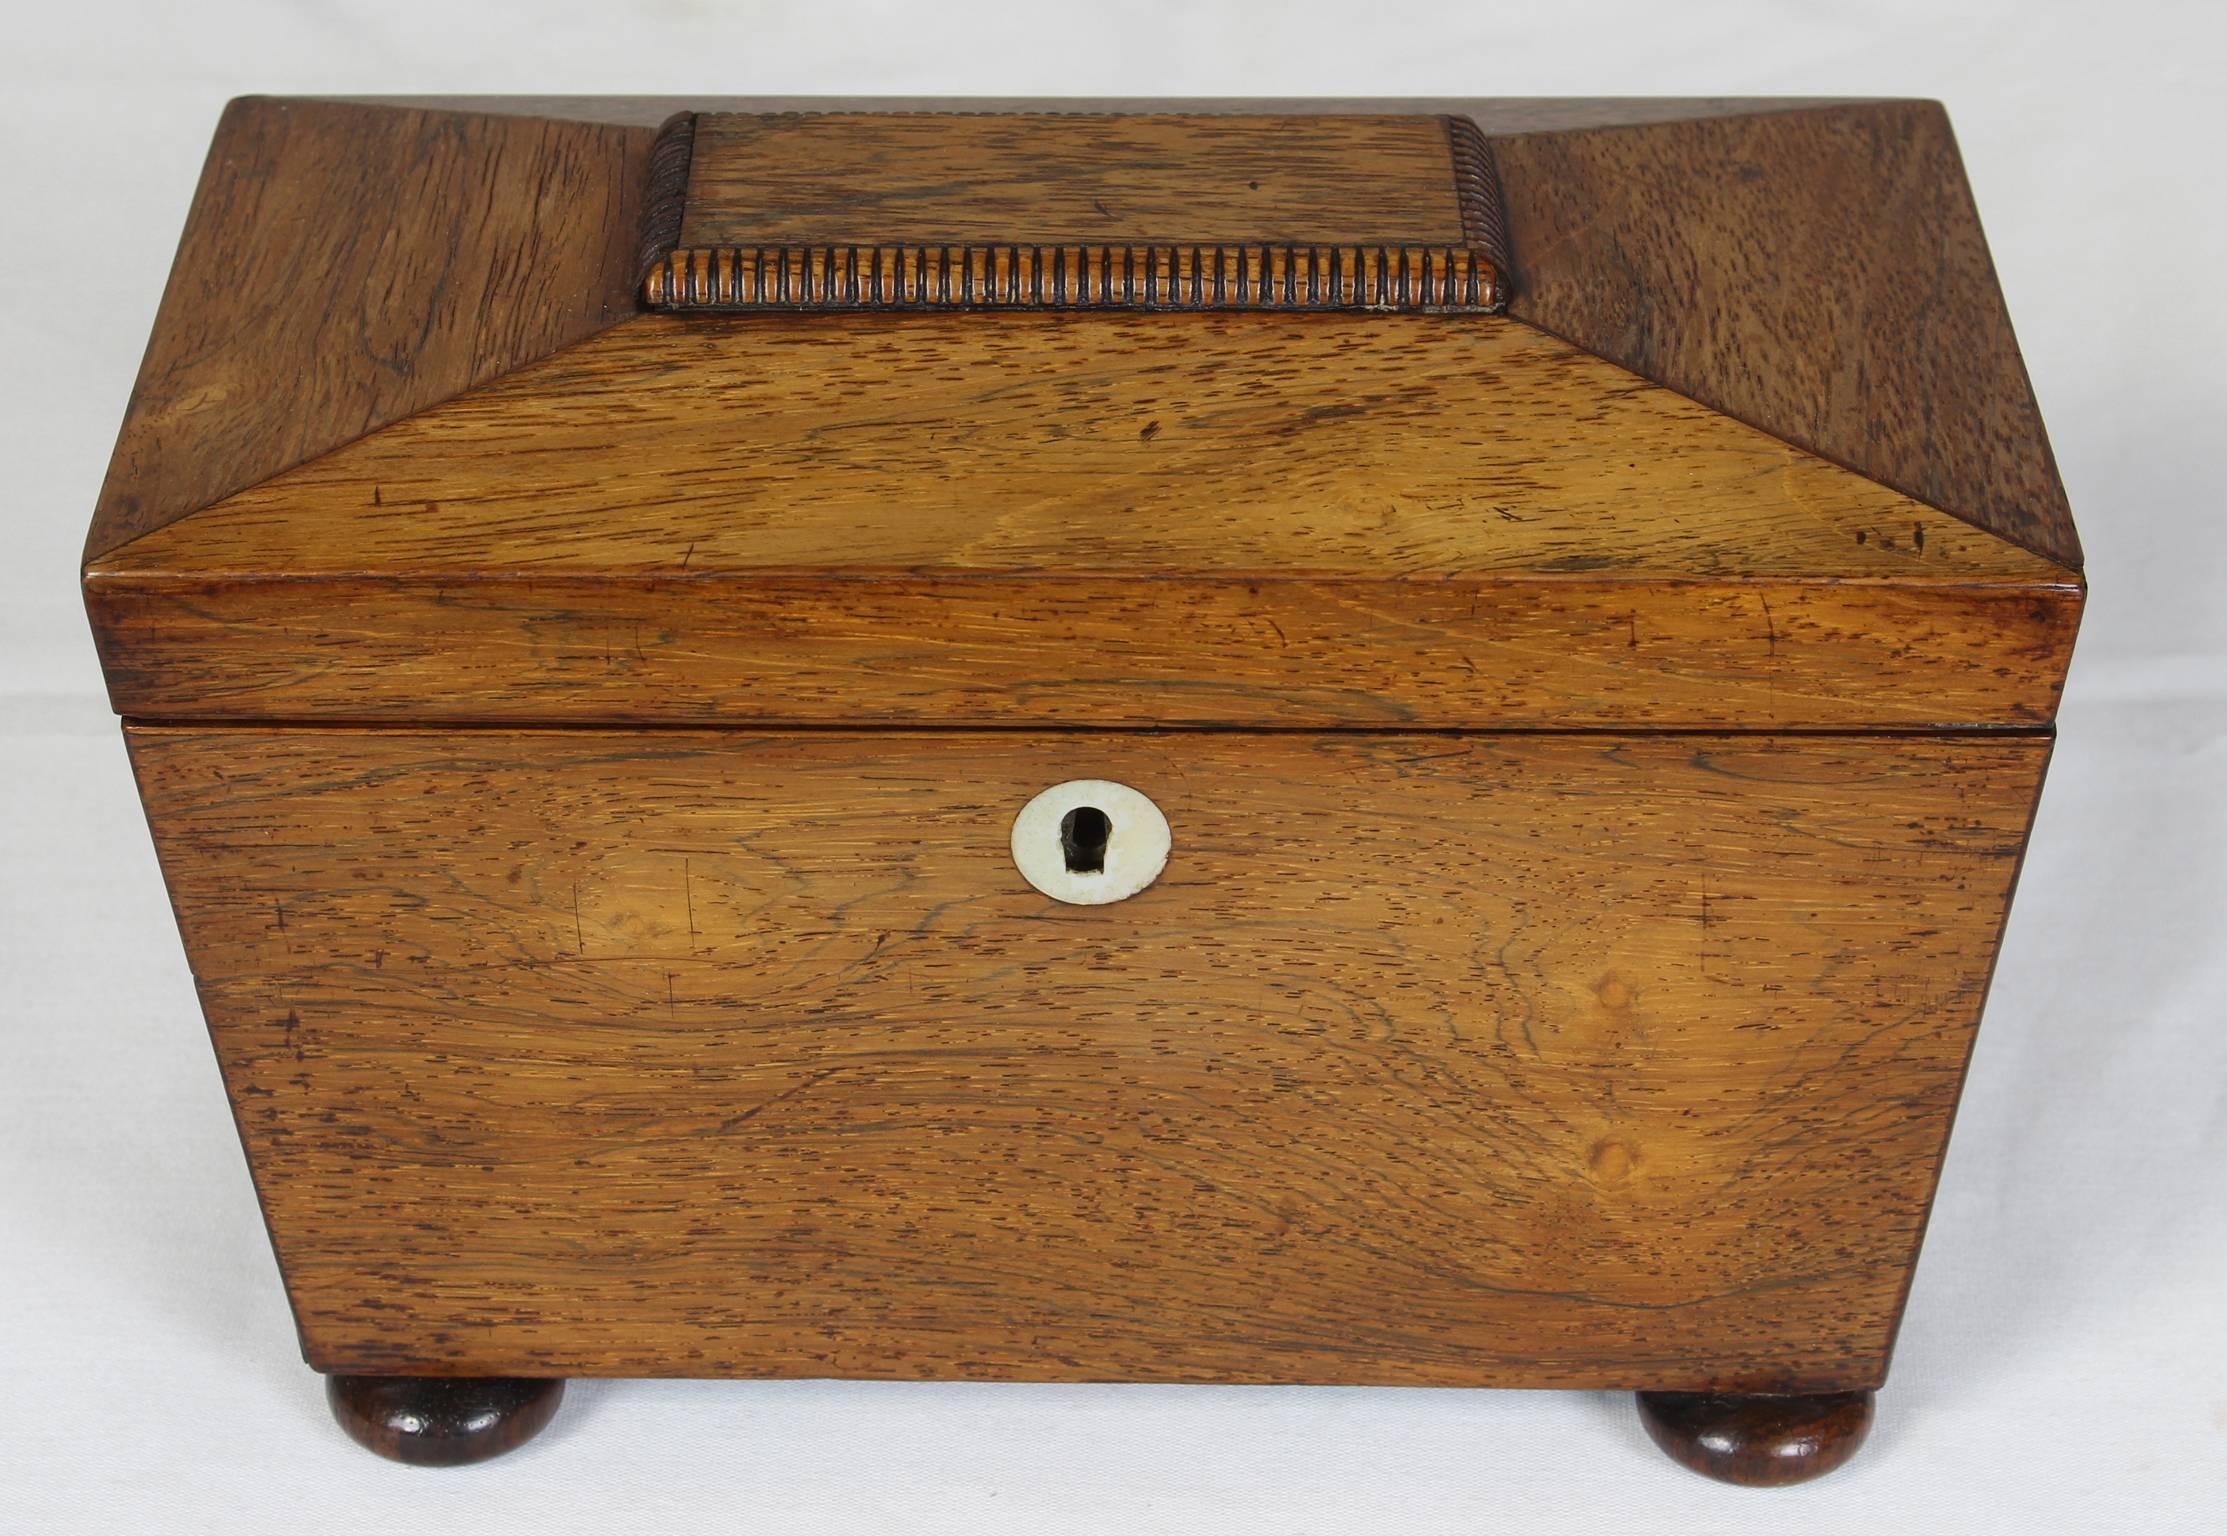 An elegant early 19th century. English sun-faded mahogany tea caddie in the shape of a sarcophagus with mother-of-pearl escutcheon on bun feet.